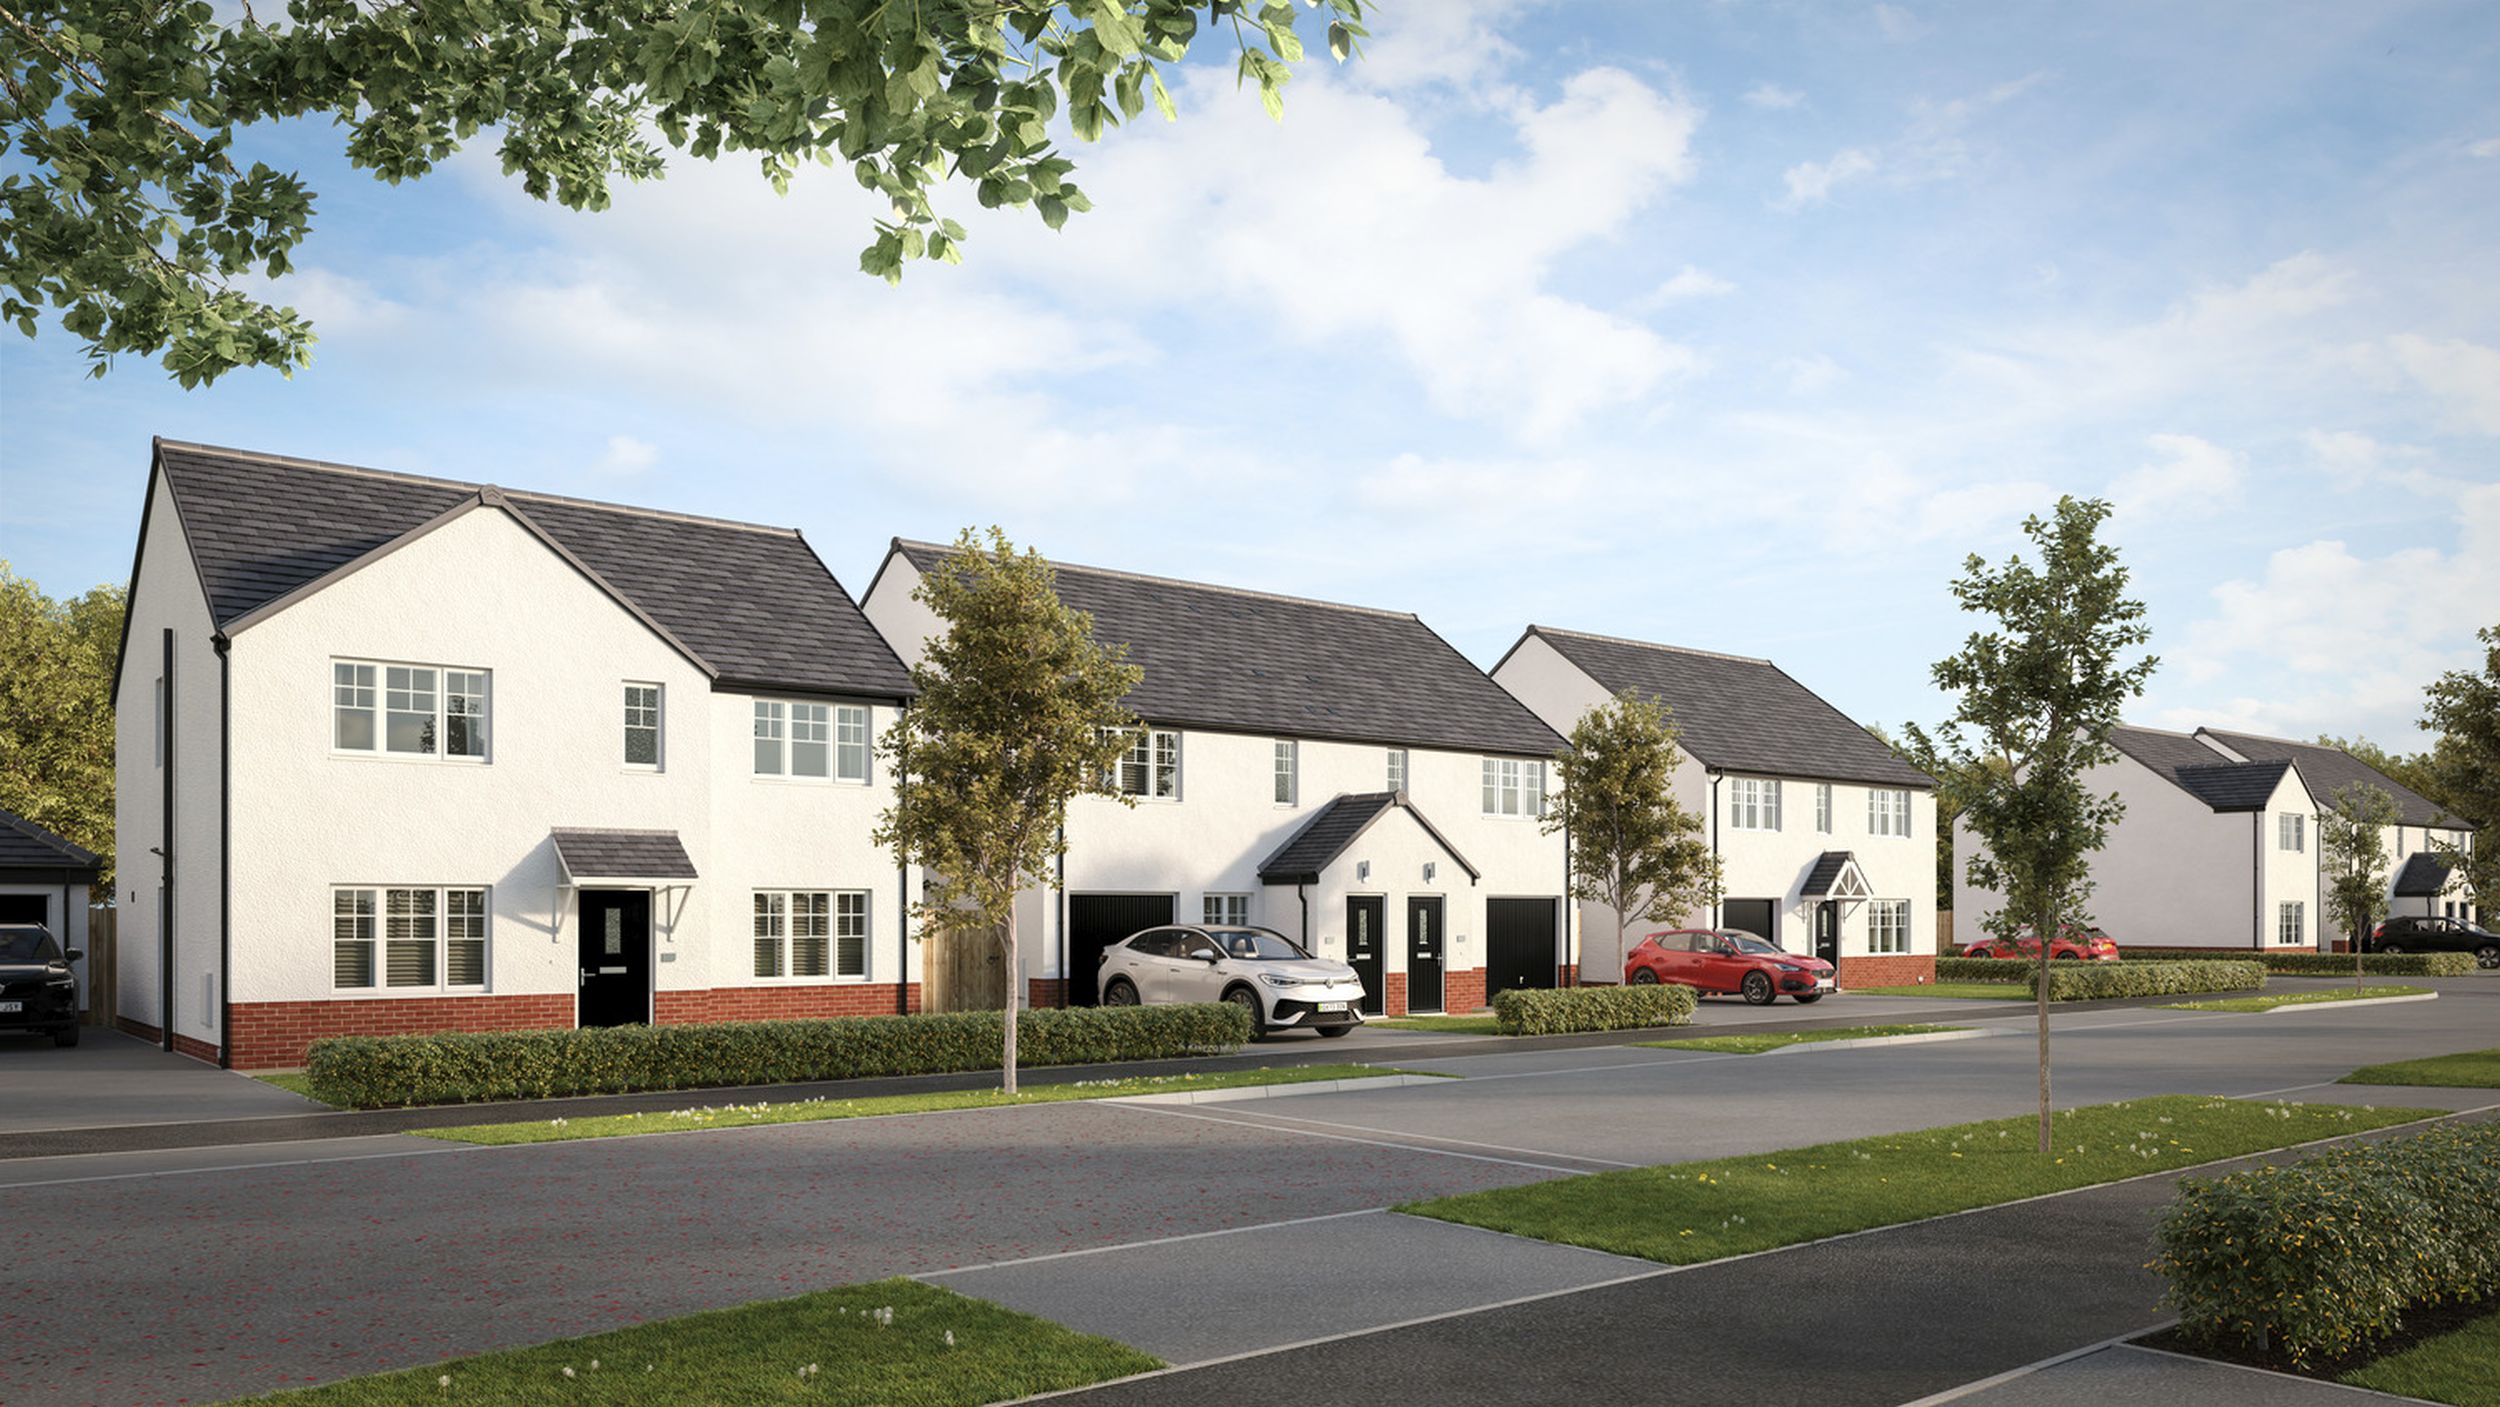 Avant Homes to build new 170-home development in Rosyth